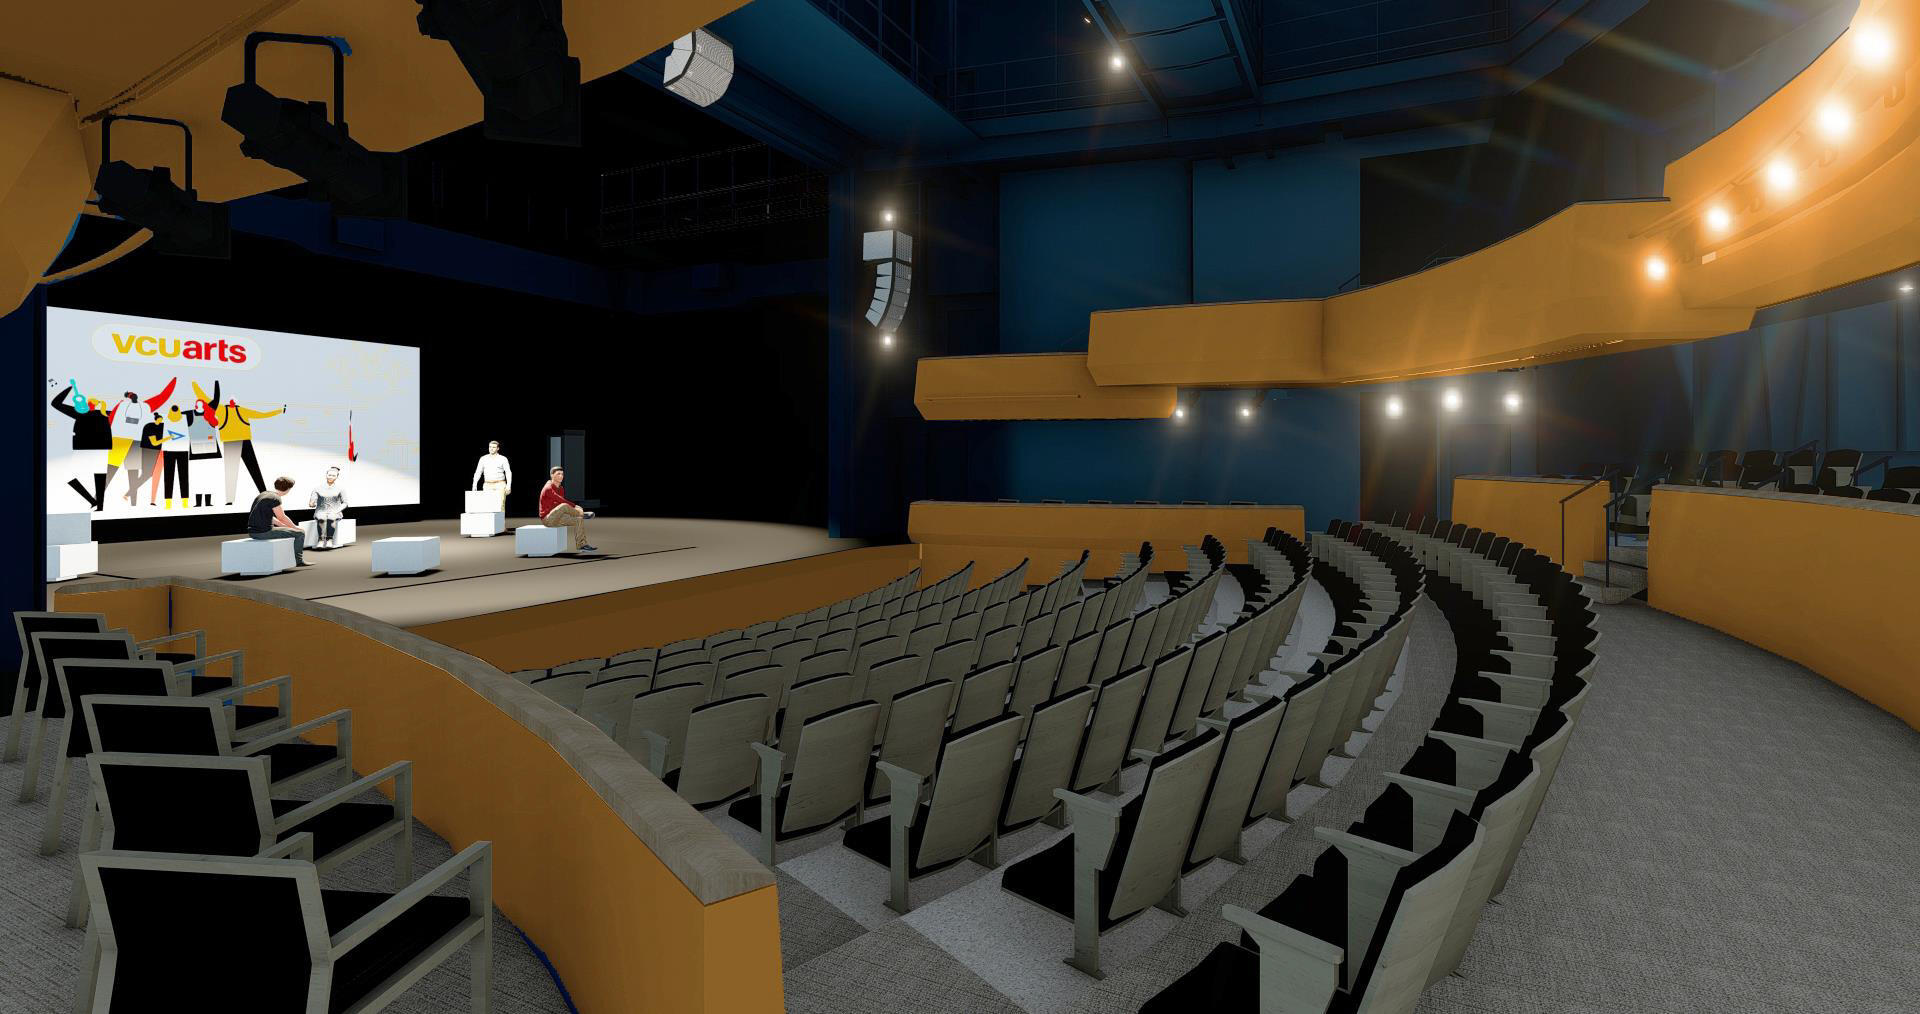 A 3D rendingering of a therater where rows of seats lead up to a stage. 